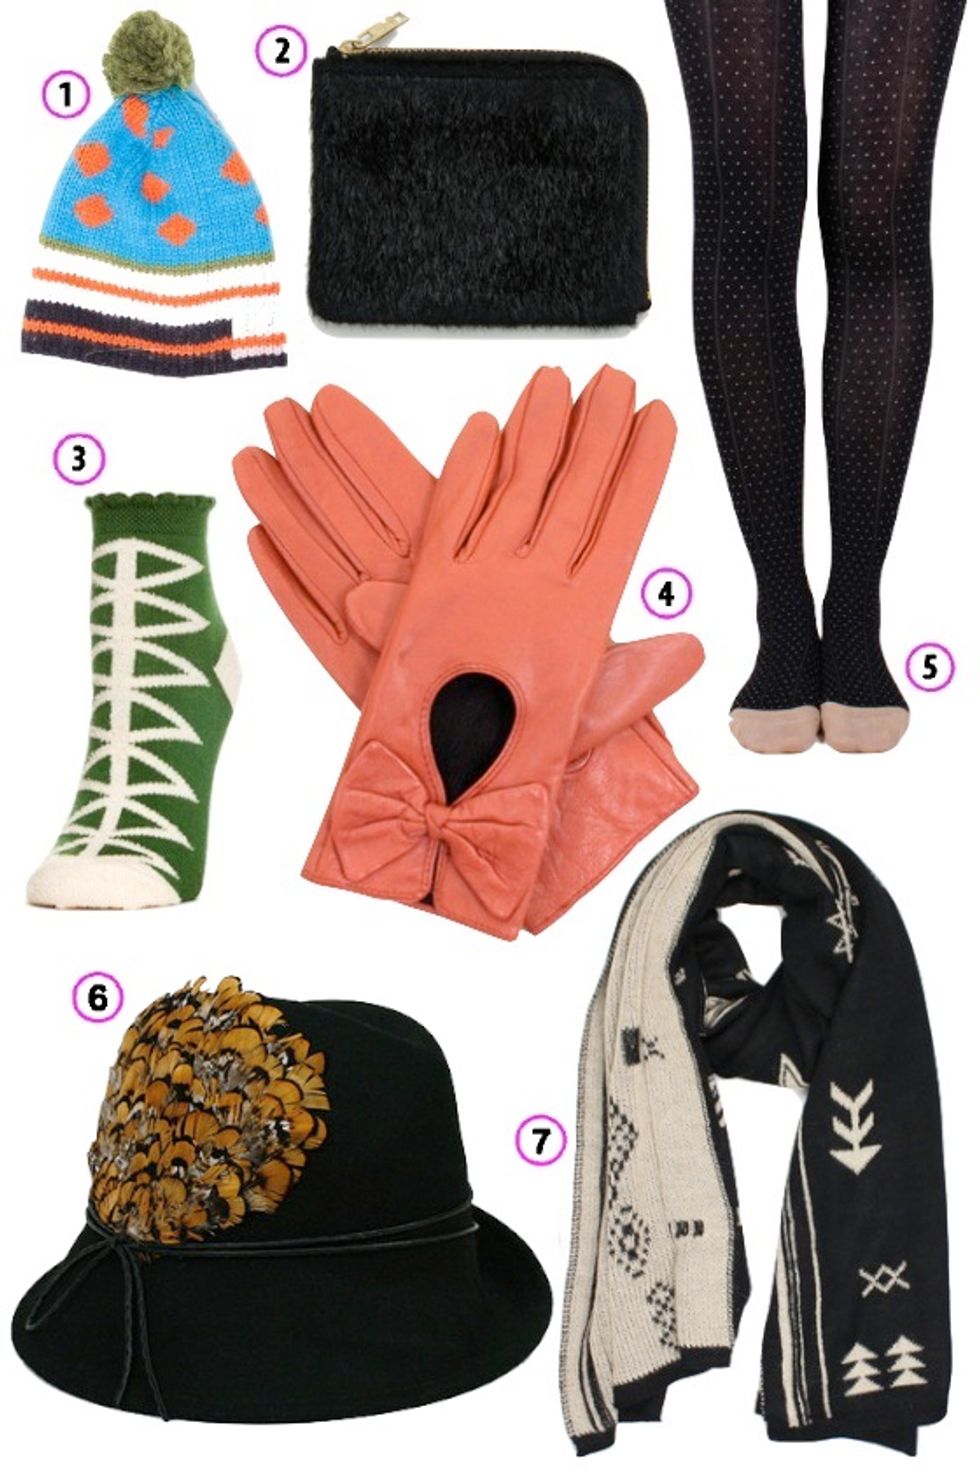 Look of the Week: Women's Cold Weather Accessories from Local Boutiques